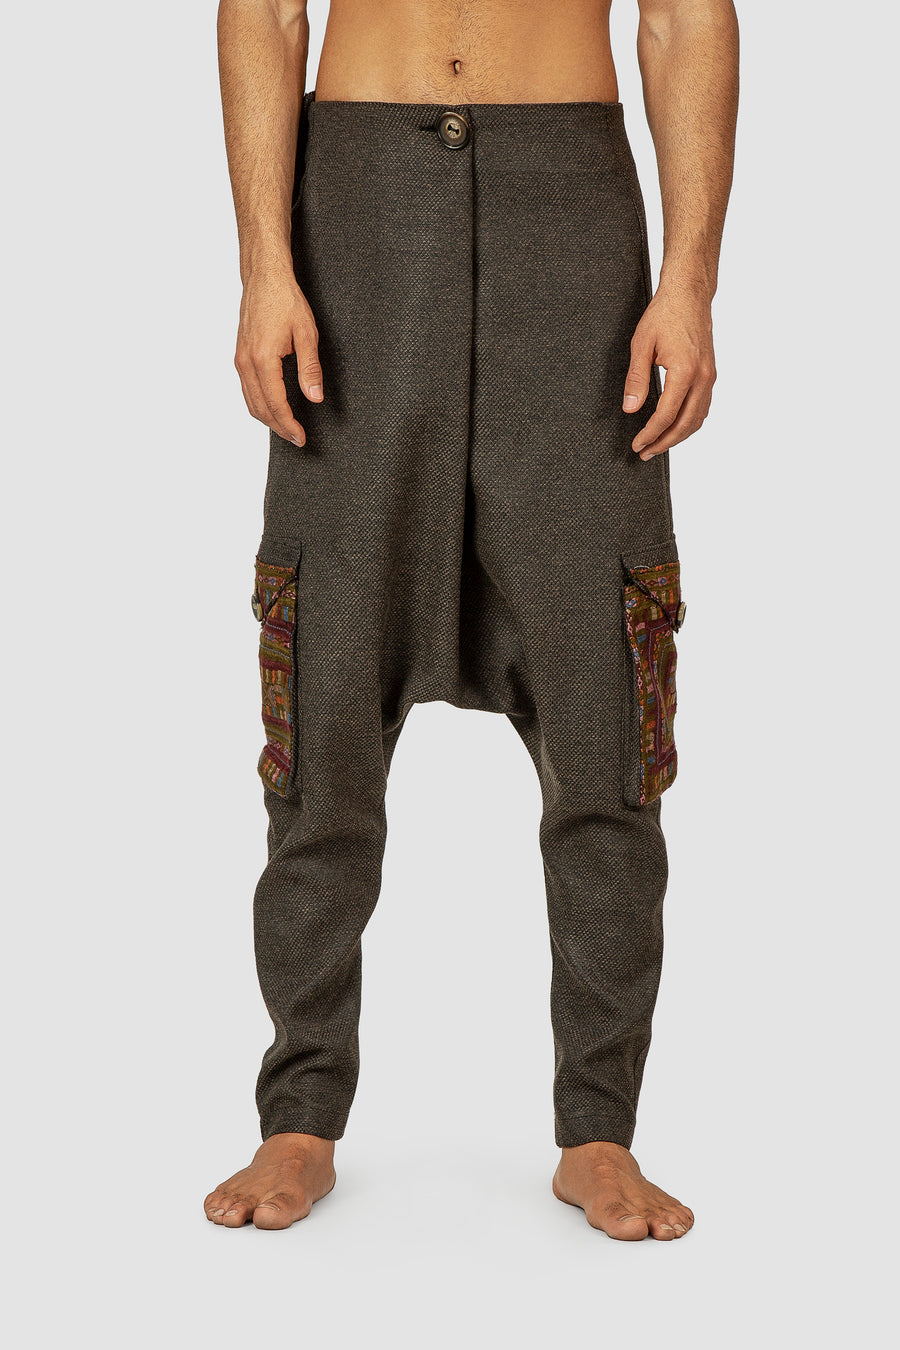 Charcoal Crossover Waist Embroidered Harem Pants